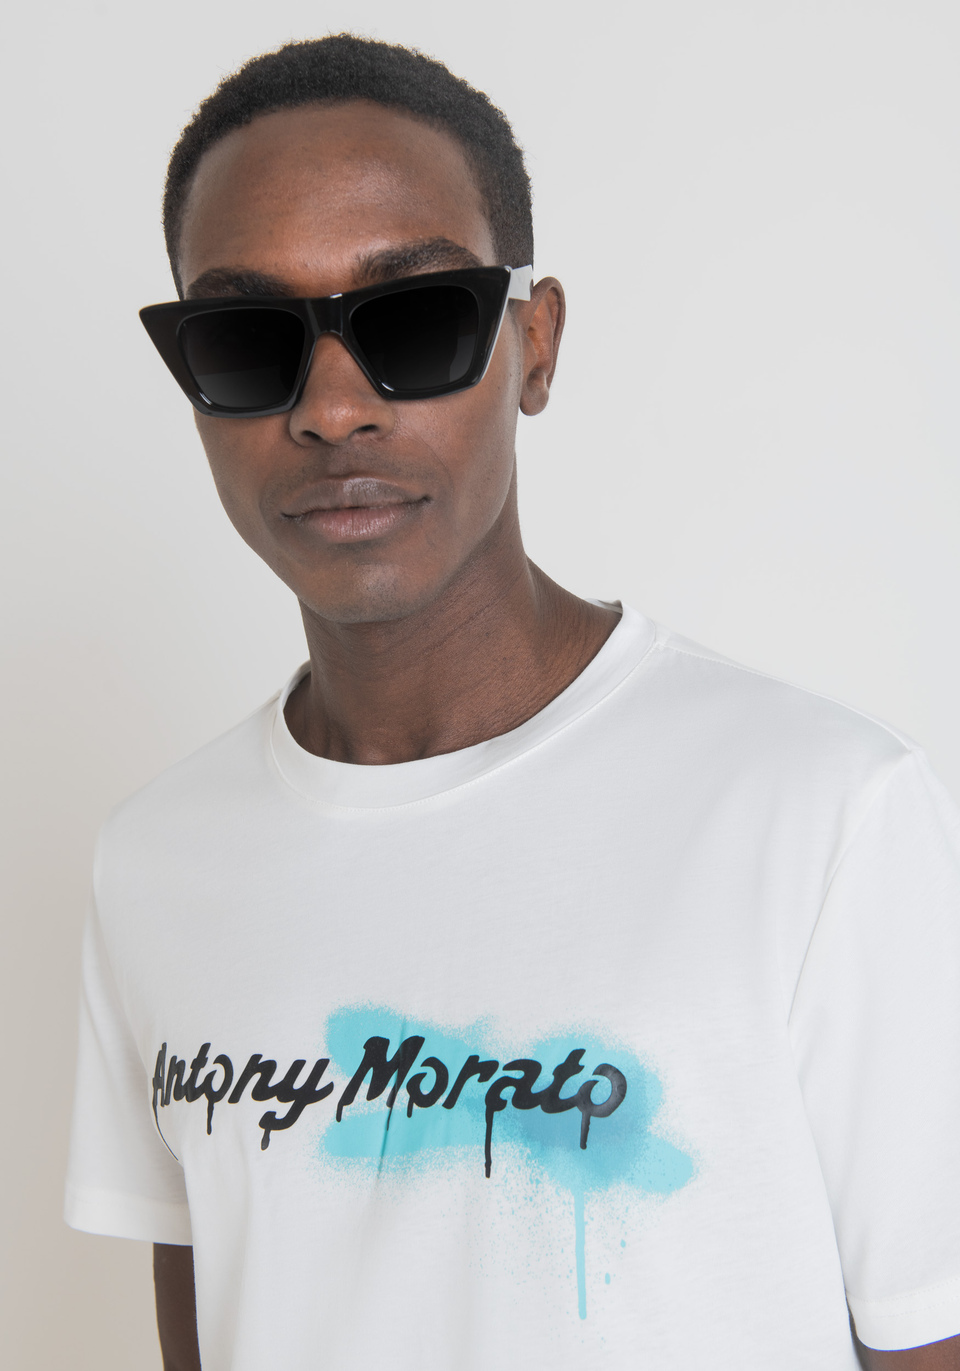 REGULAR-FIT T-SHIRT IN SOFT COTTON WITH SPRAY-EFFECT "MORATO" PRINT - Antony Morato Online Shop